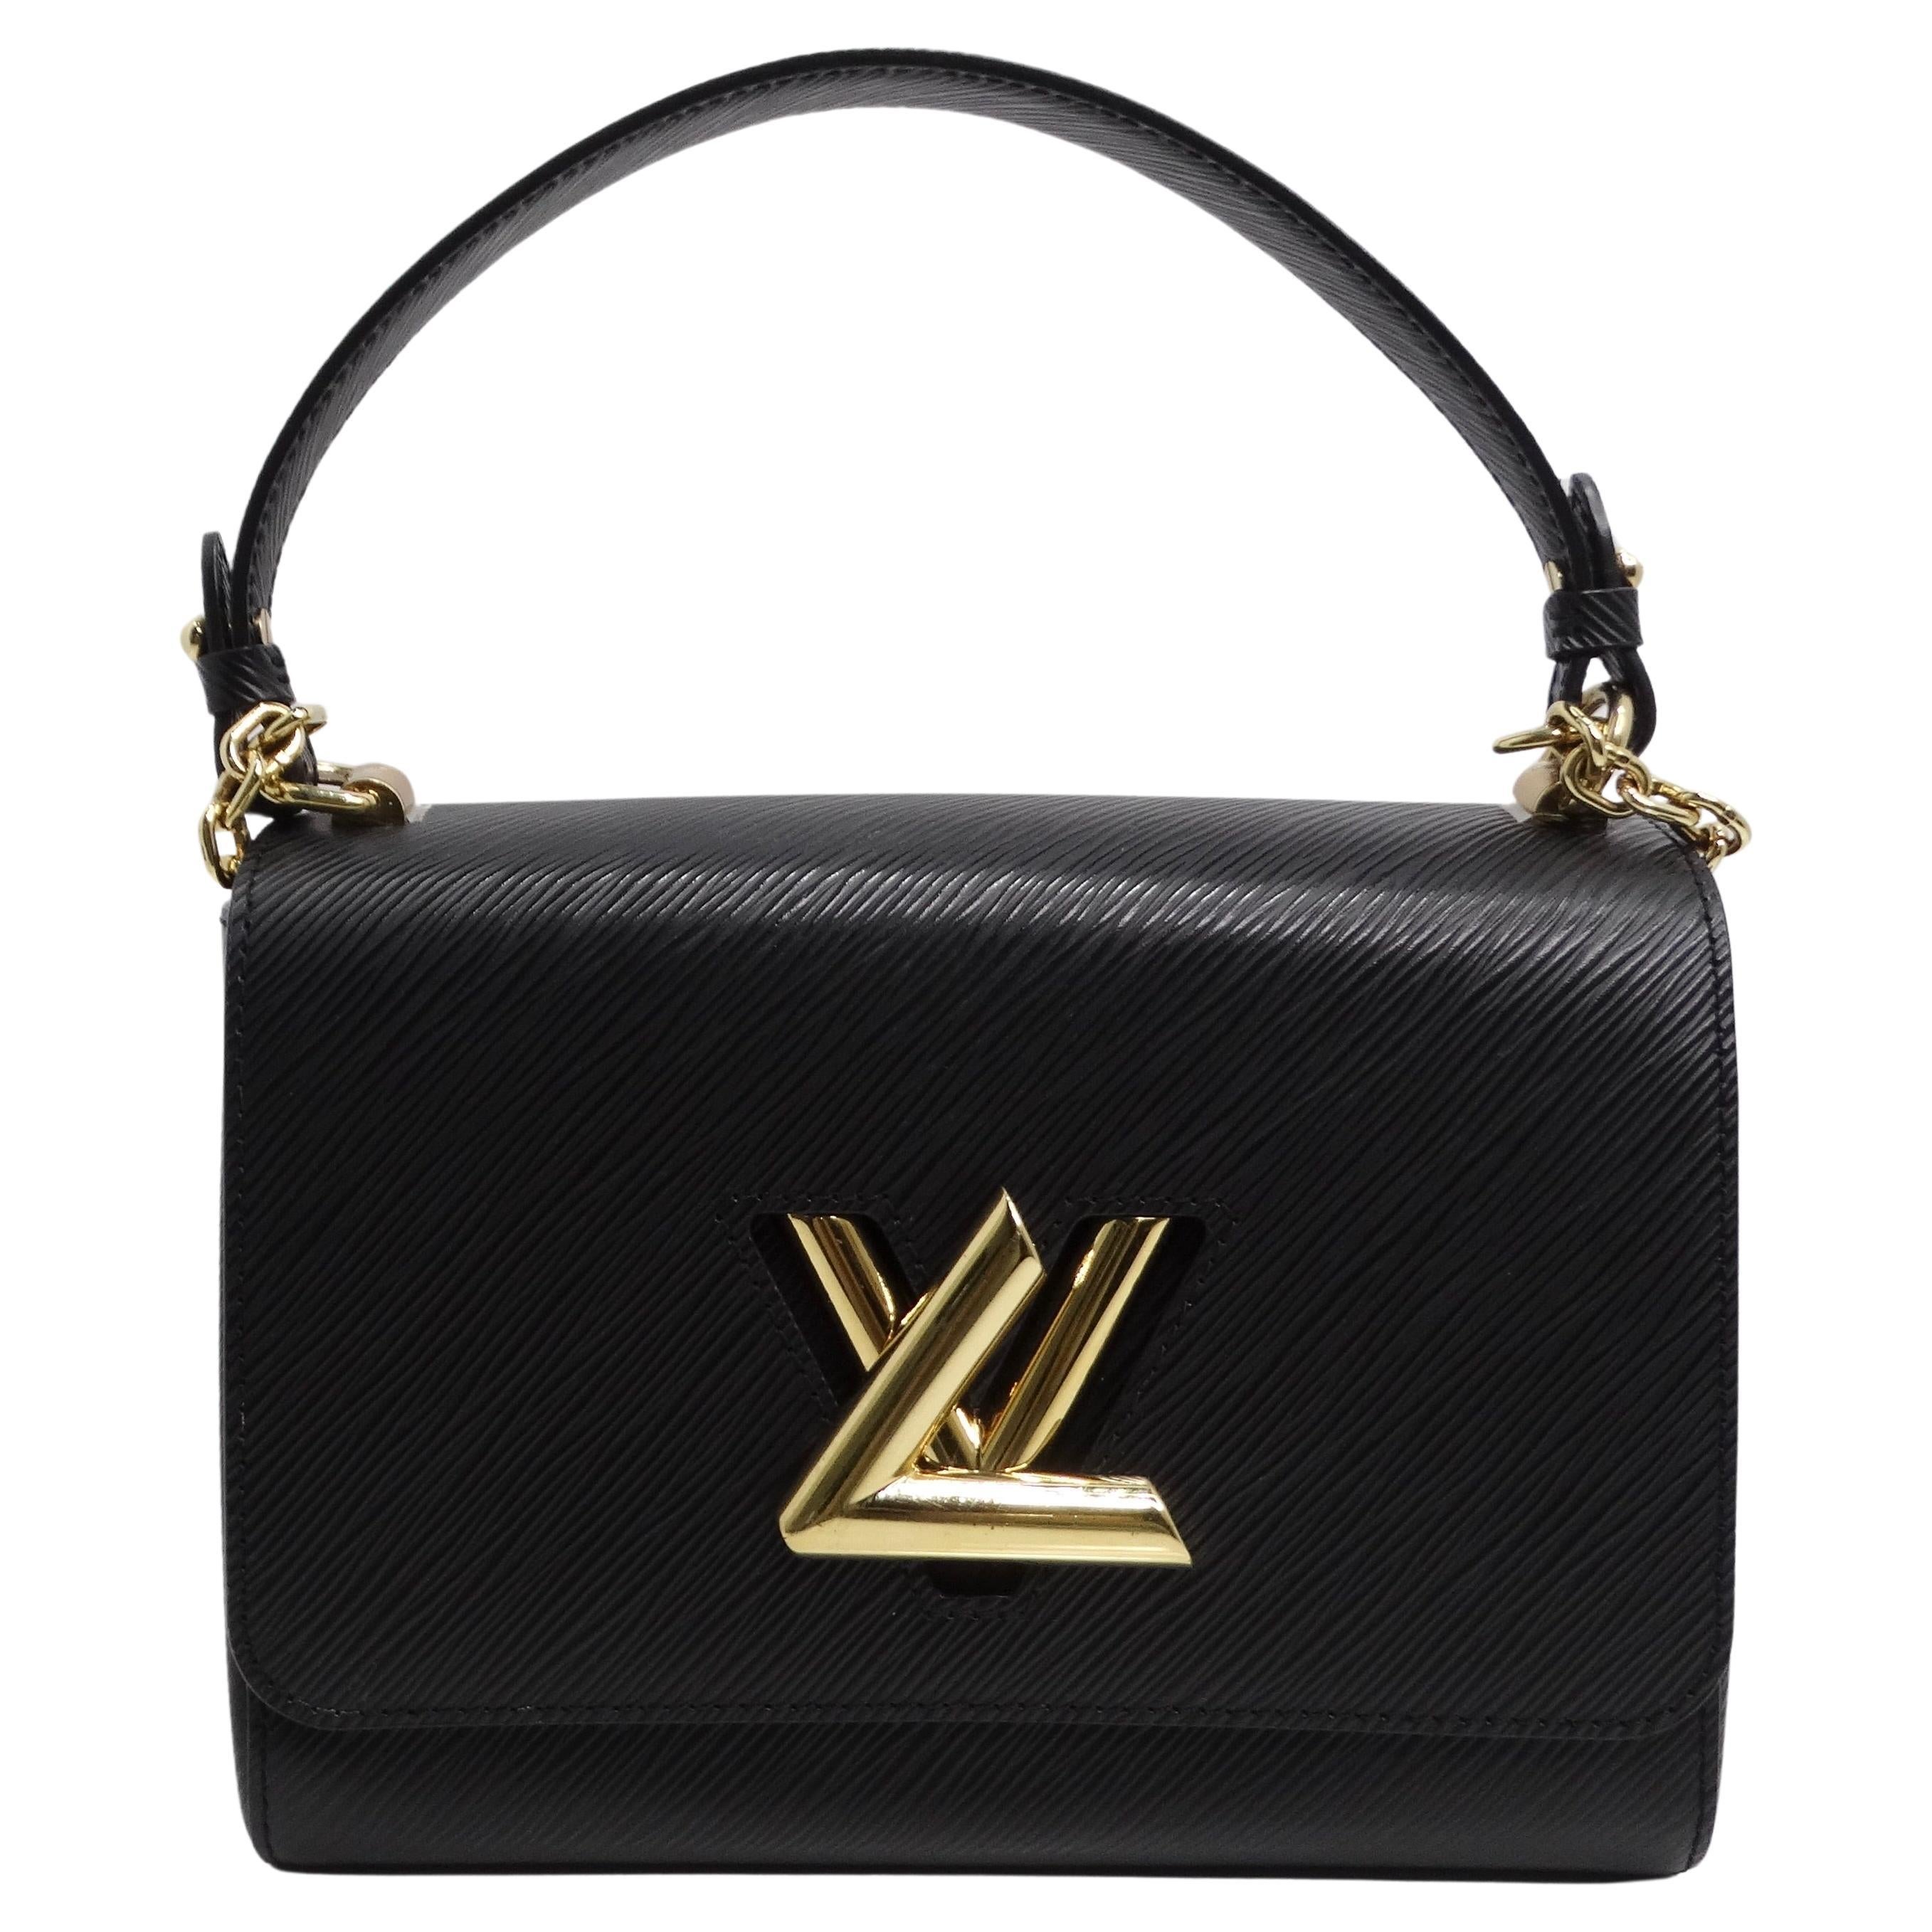 Who is the creative director of Louis Vuitton?